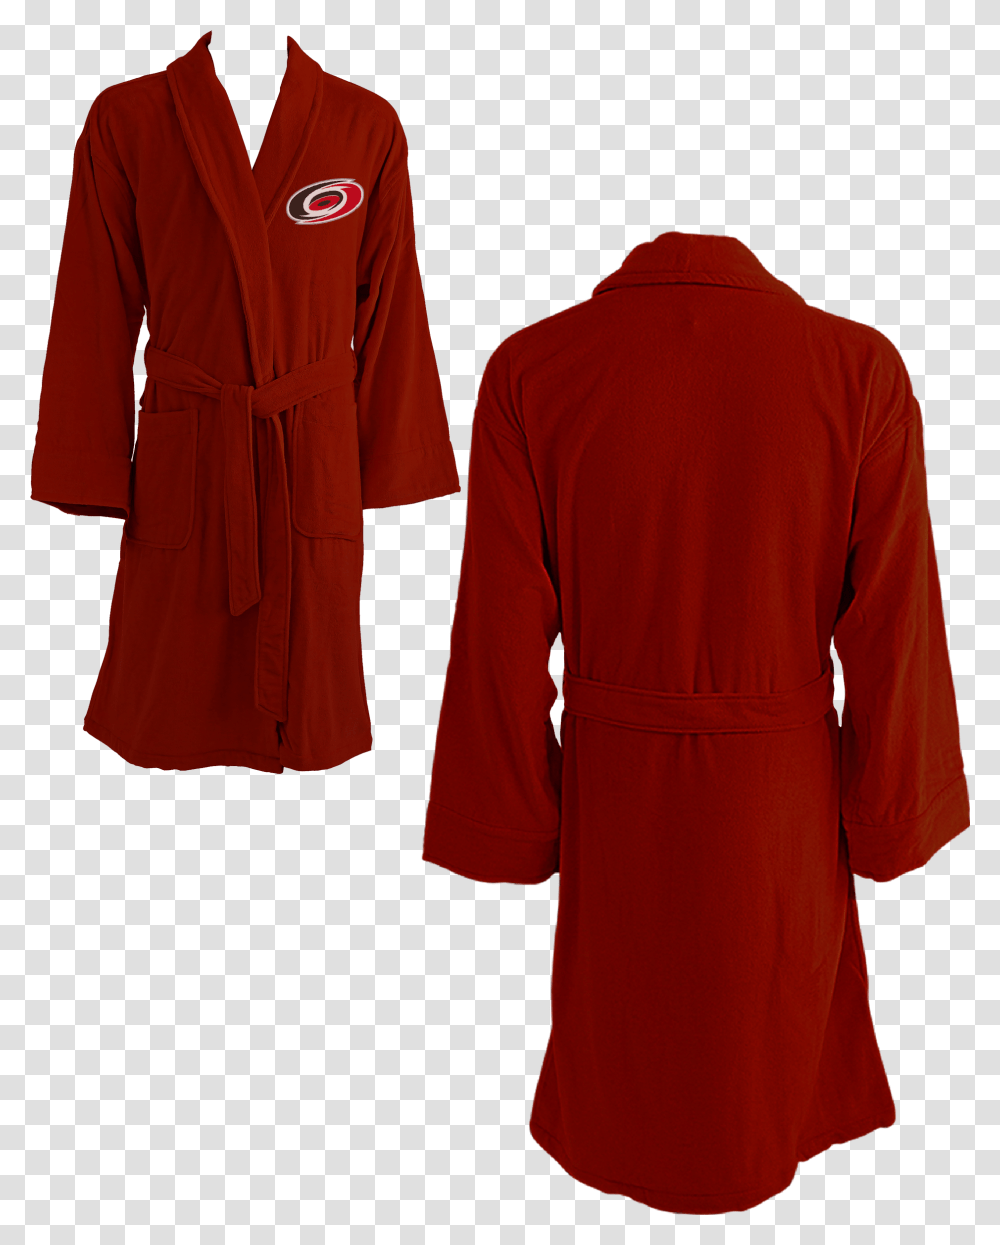 Gamecock Clipart Seattle Seahawks, Apparel, Robe, Fashion Transparent Png